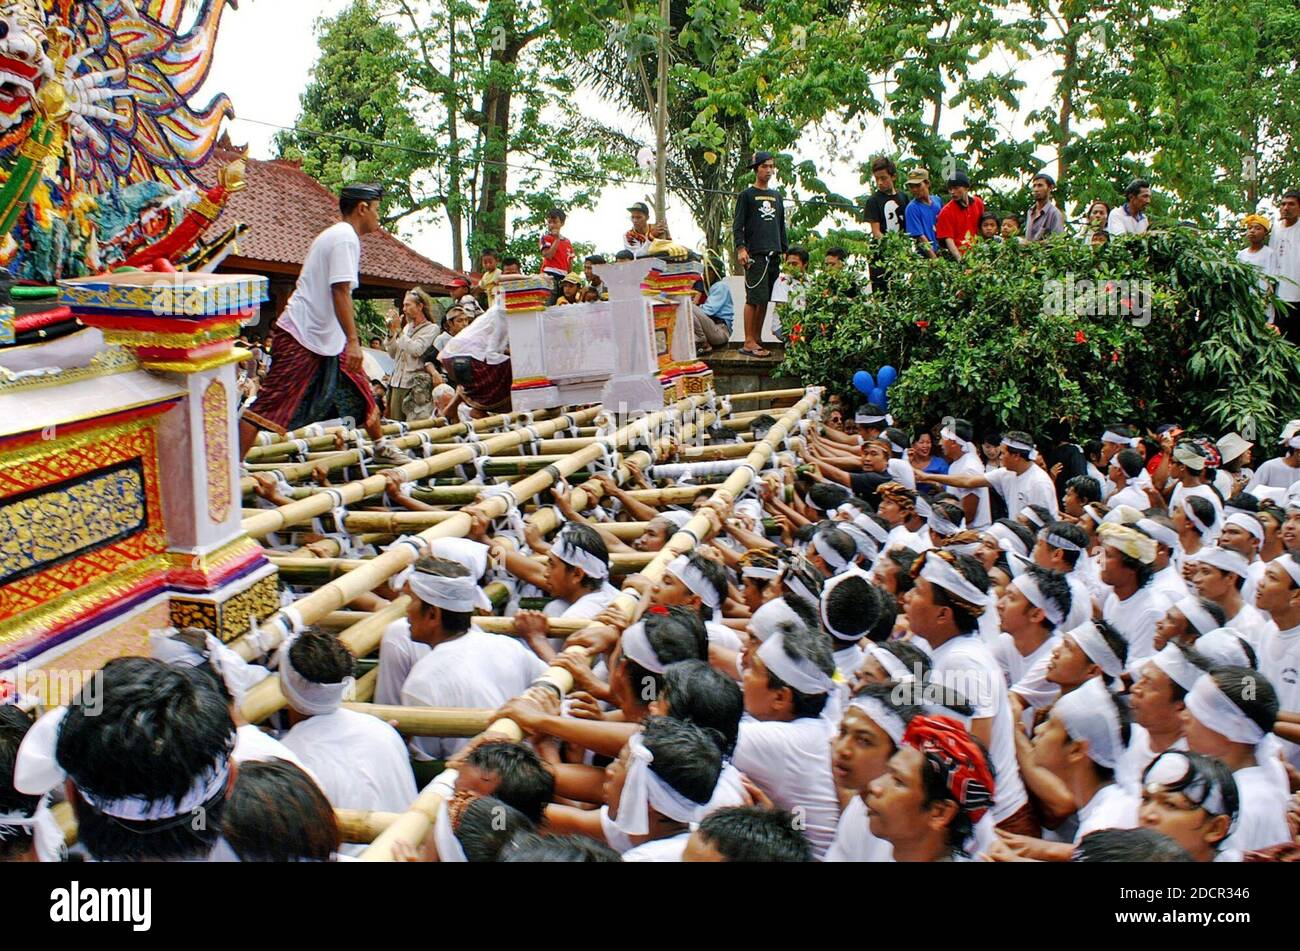 Young Balinese men carry and follow an opulent funeral tower during a procession through Ubud, Bali, Indonesia.  The Balinese Hindu funeral is culturally rich with ritual and custom.  The size and expense of the multi-level casket is based on the caste, wealth, and prestige of the person who passed on.  This massive funeral ceremony and celebration indicates the person was important in Balinese society.  Onlookers watch the procession celebrating life, death, and reincarnation reflecting the Balinese life-cycle. Stock Photo